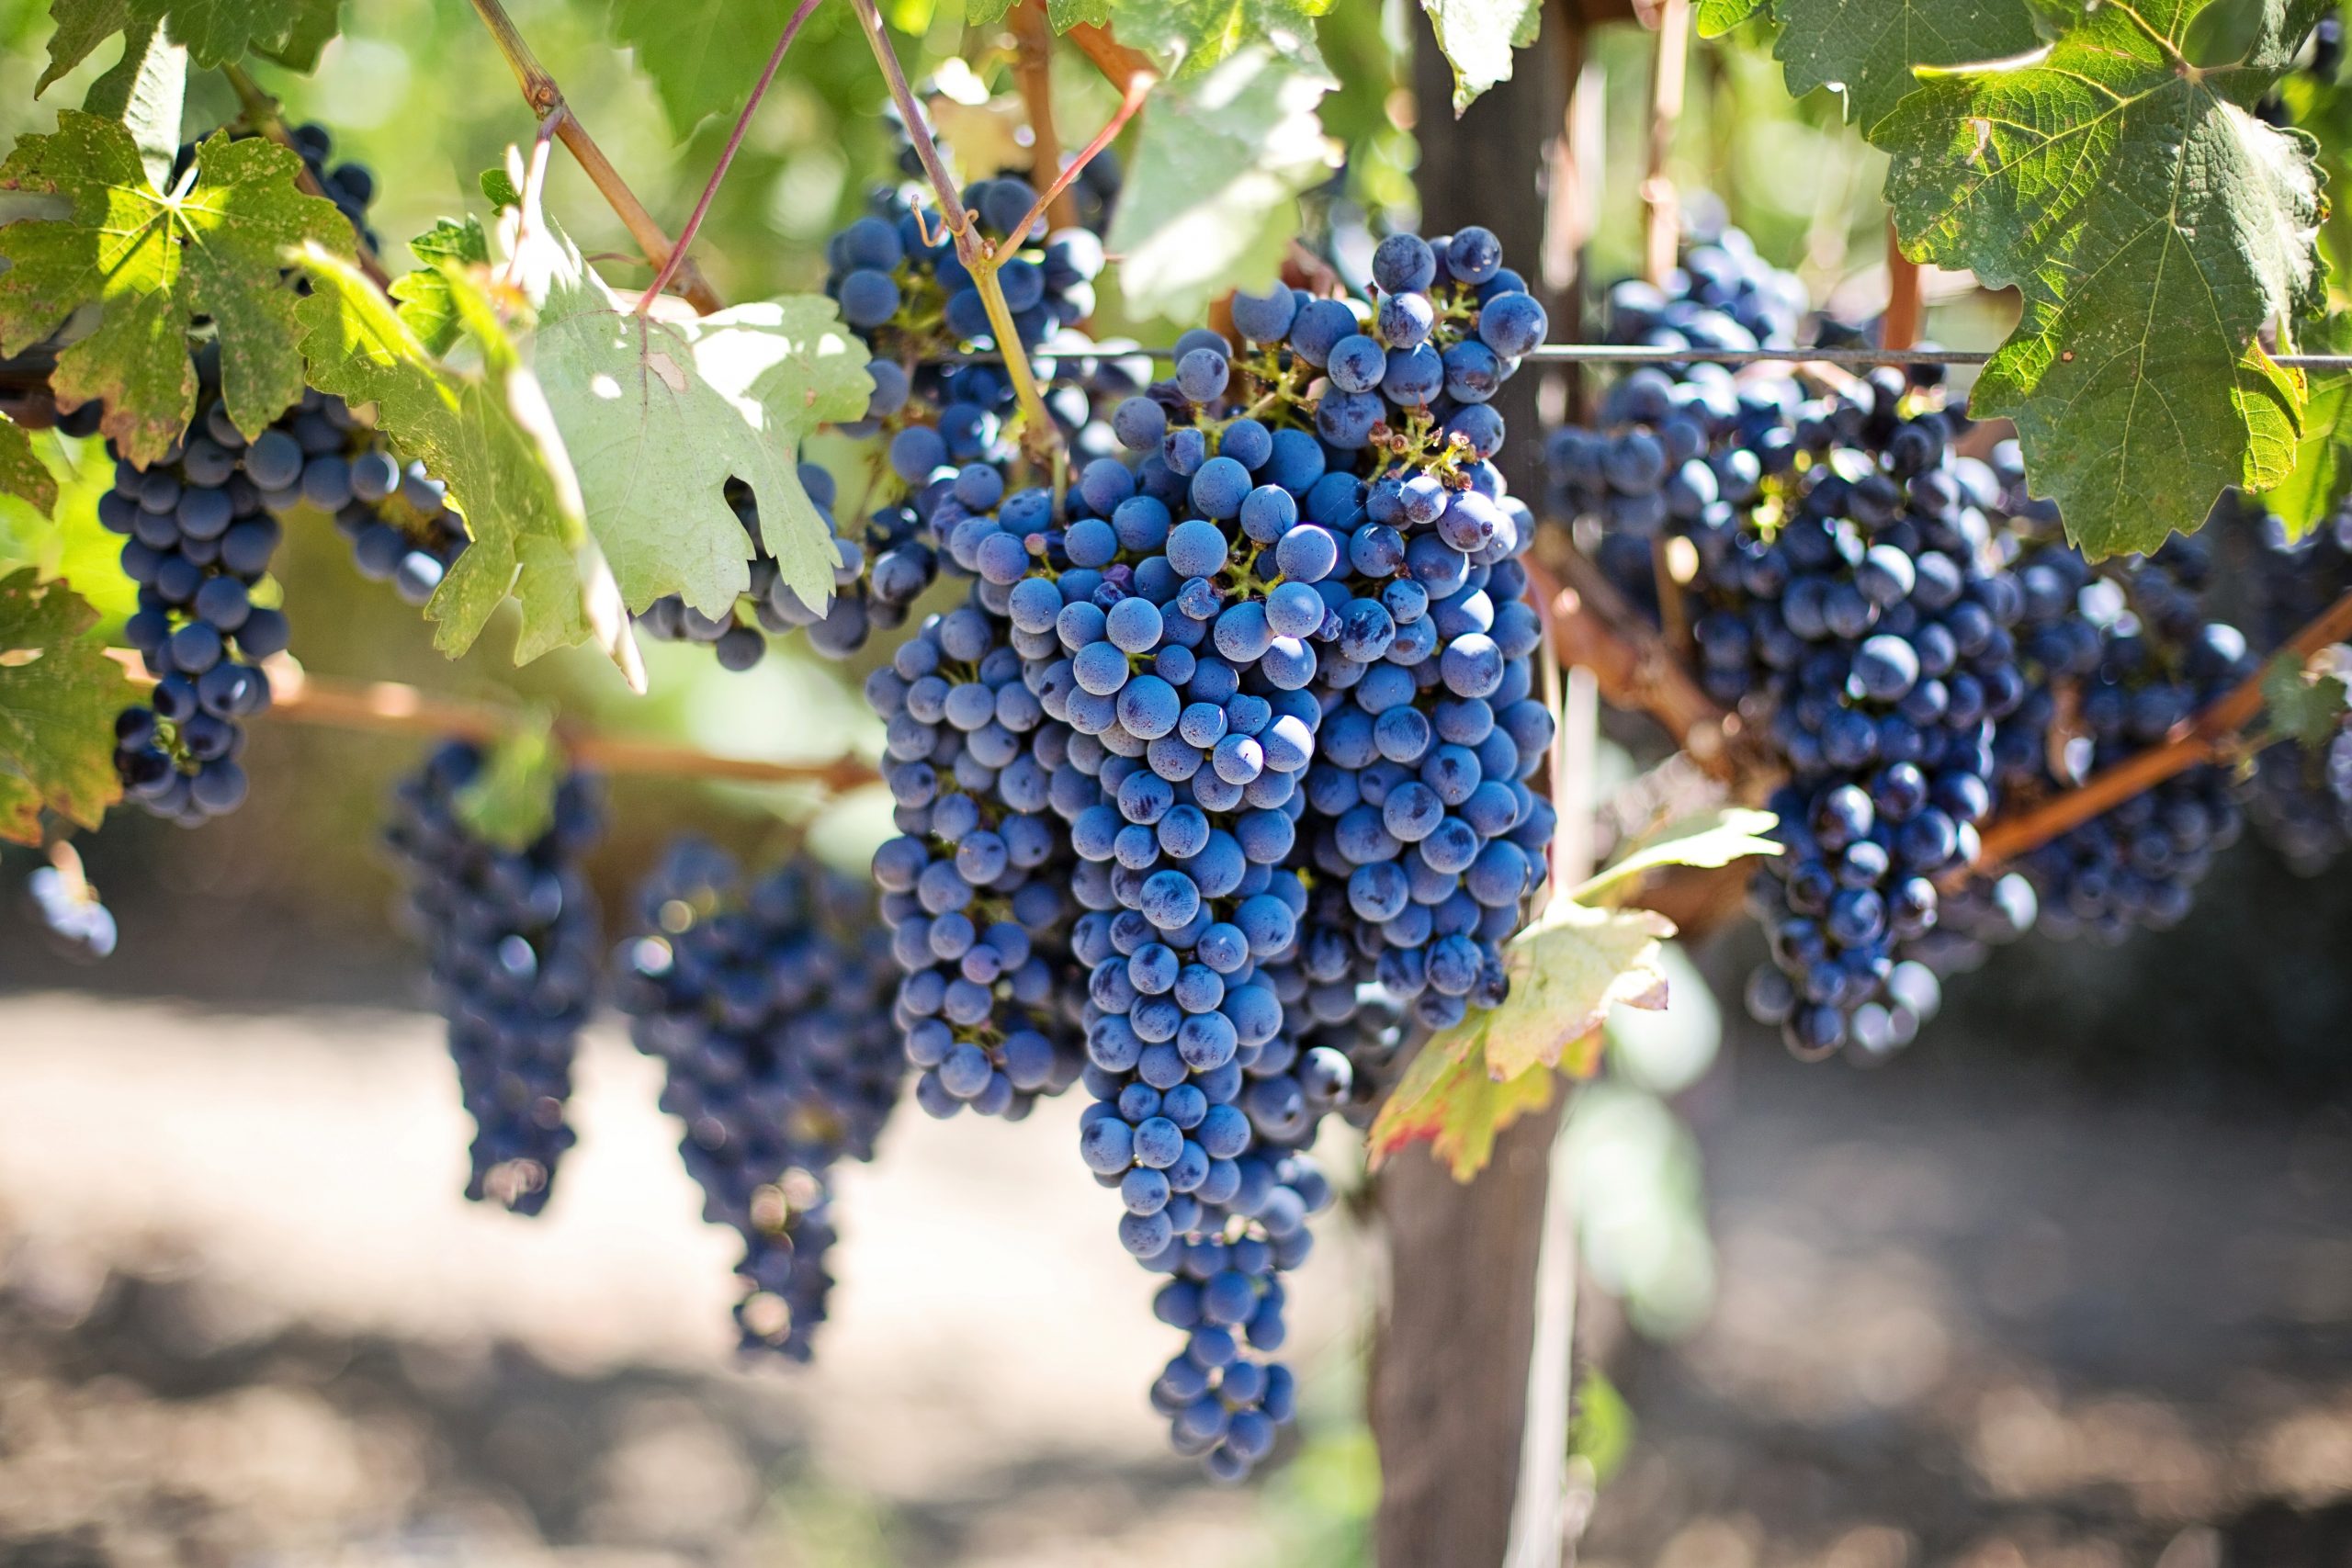 This Is What Happens To Your Body If You Eat Grapes Every Day For One Month